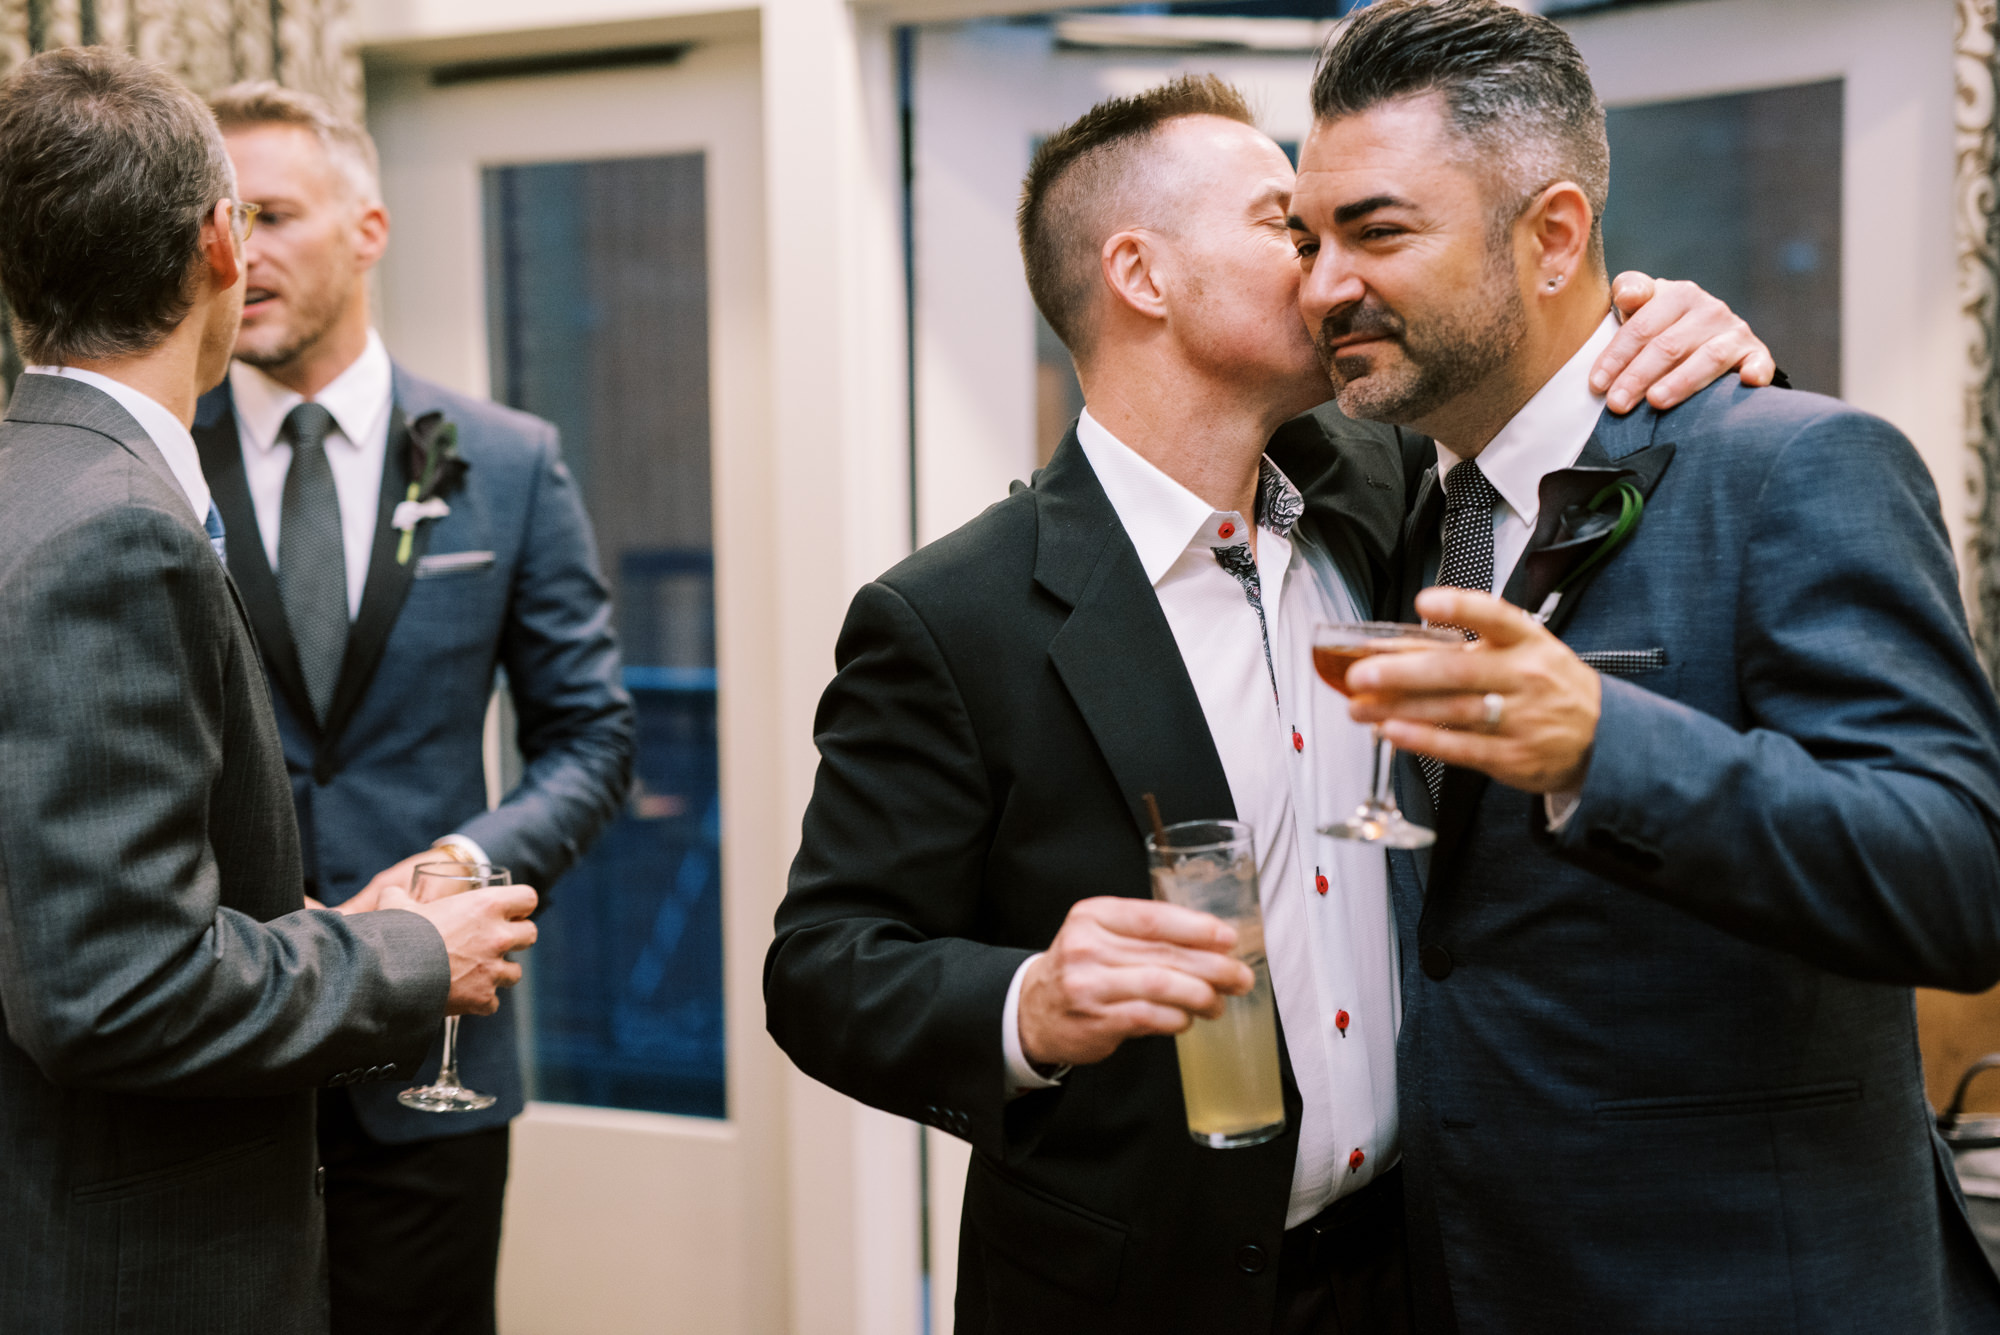 Alexis Hotel wedding: Michael and Justin post wedding ceremony moments